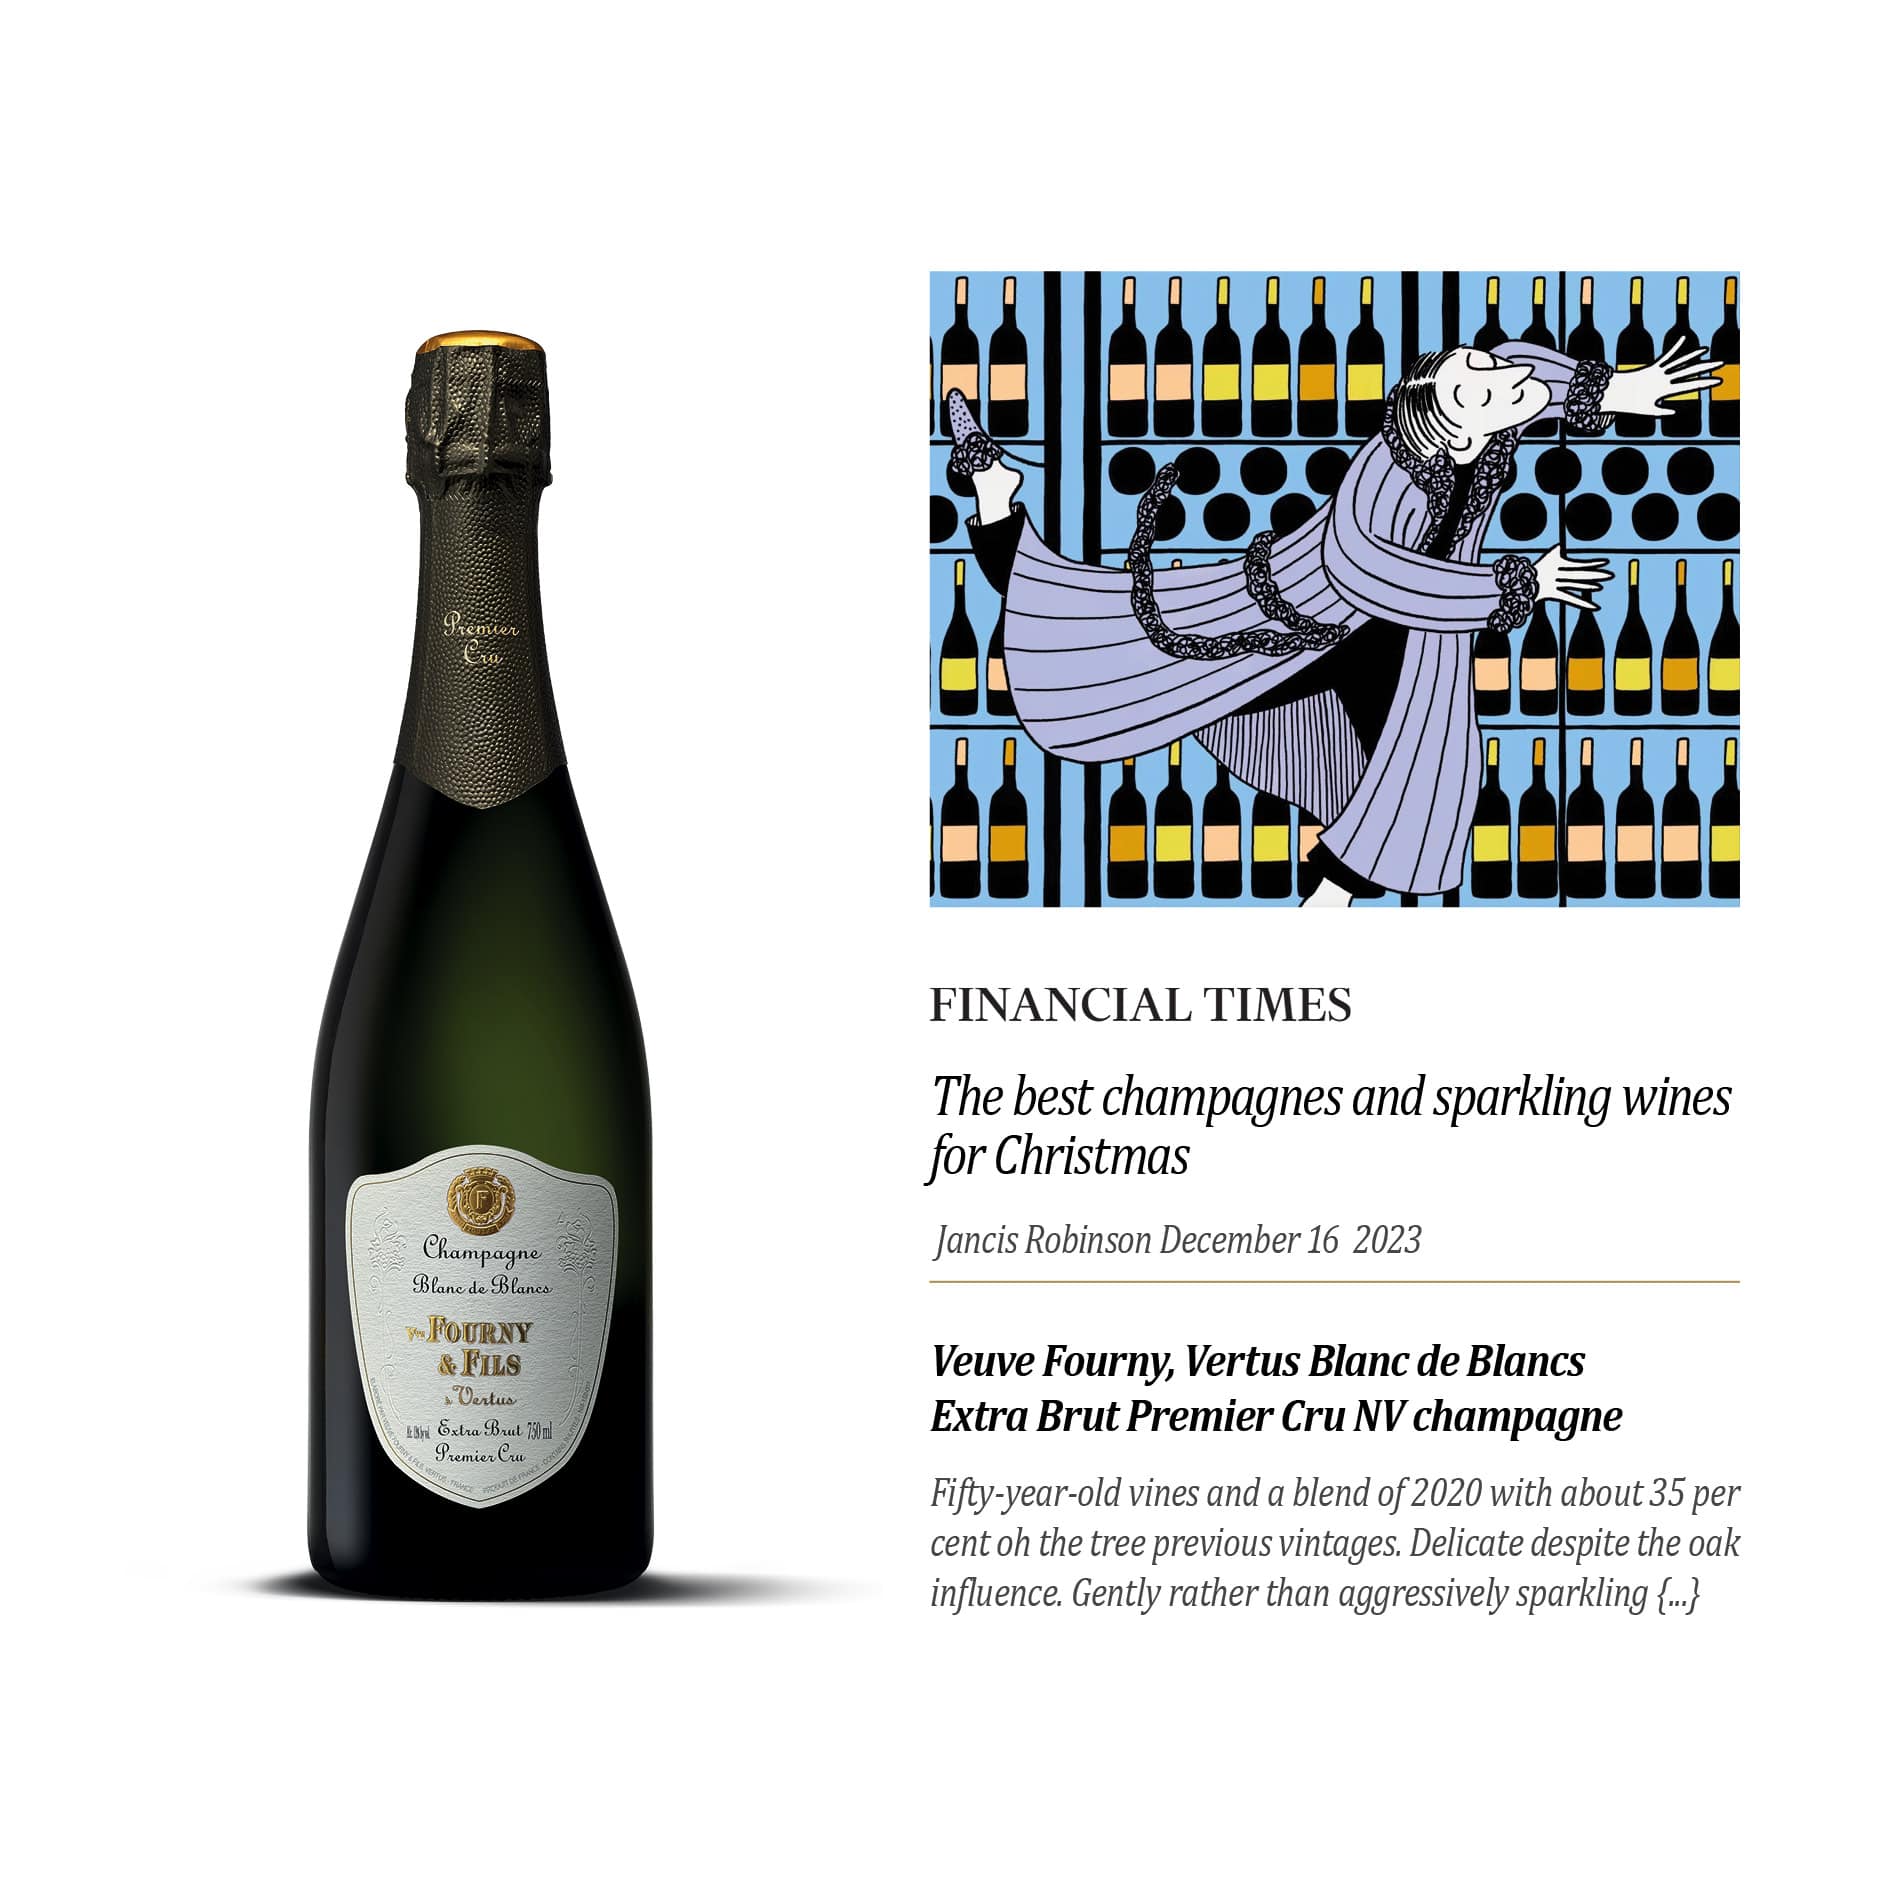 The best champagnes and sparkling wines for Christmas